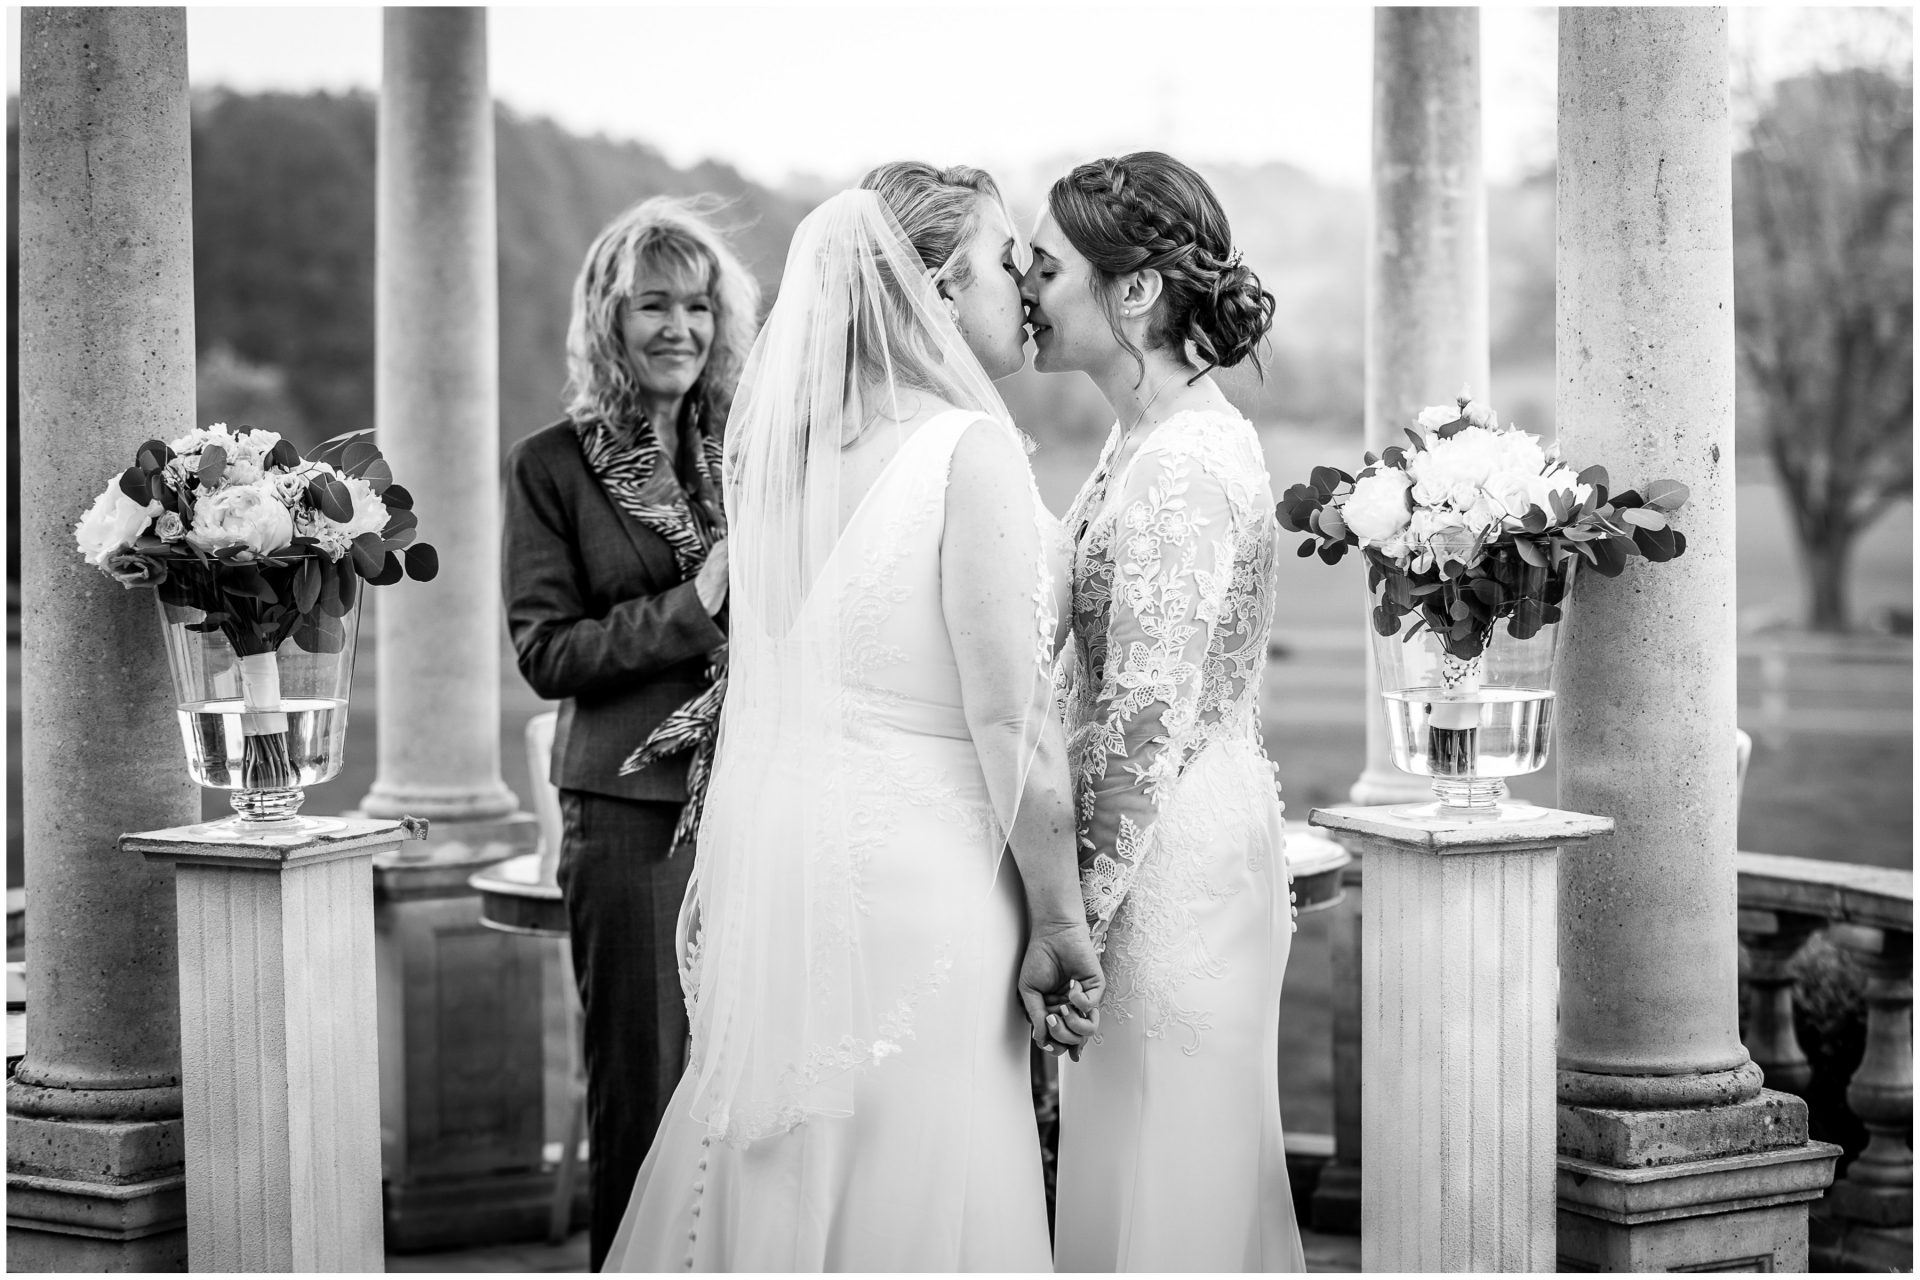 The newly married brides kiss during Hampshire same sex wedding ceremony